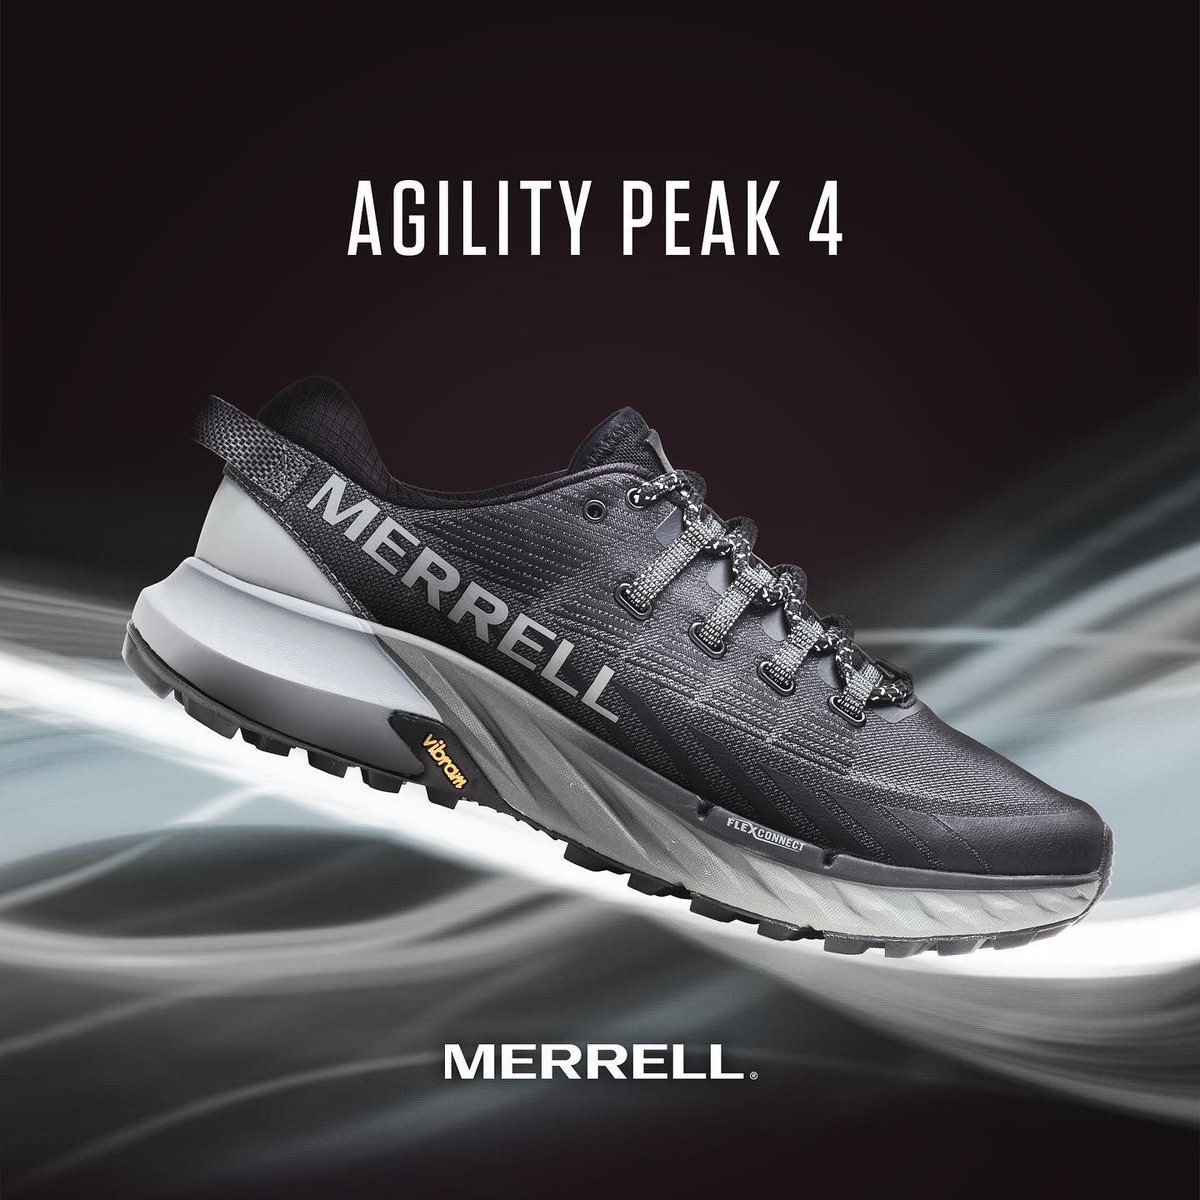 Merrell Philippines on Twitter: "Introducing the Agility Peak 4. This shoe our grippiest trail running shoe yet, for those who want a lot of protection on even the most rugged